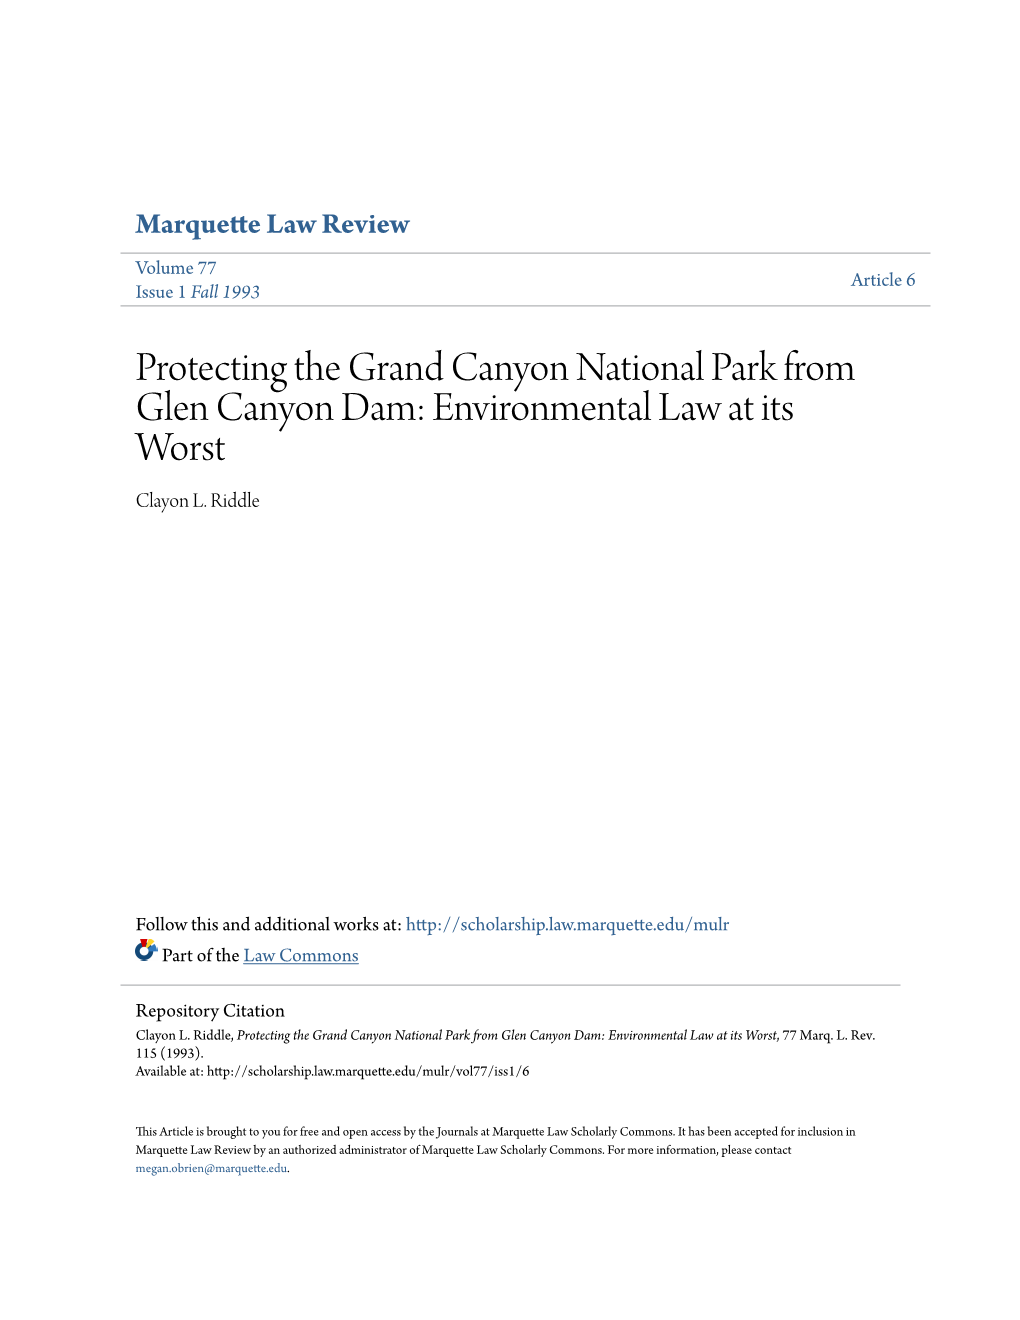 Protecting the Grand Canyon National Park from Glen Canyon Dam: Environmental Law at Its Worst Clayon L